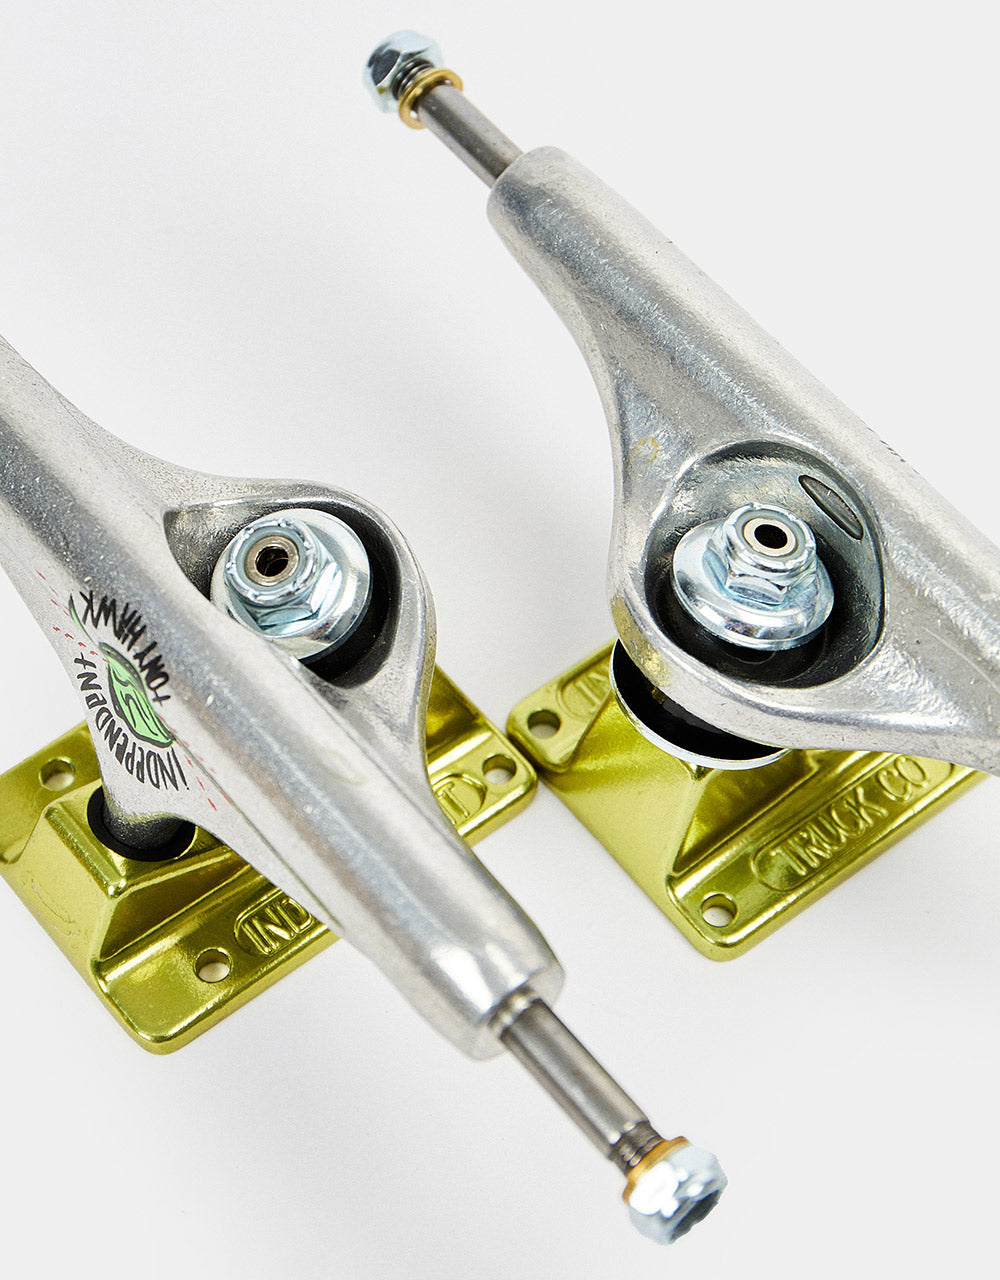 Independent Hawk Skull Stage 11 Hollow Forged 139 Skateboard Trucks (Pair)